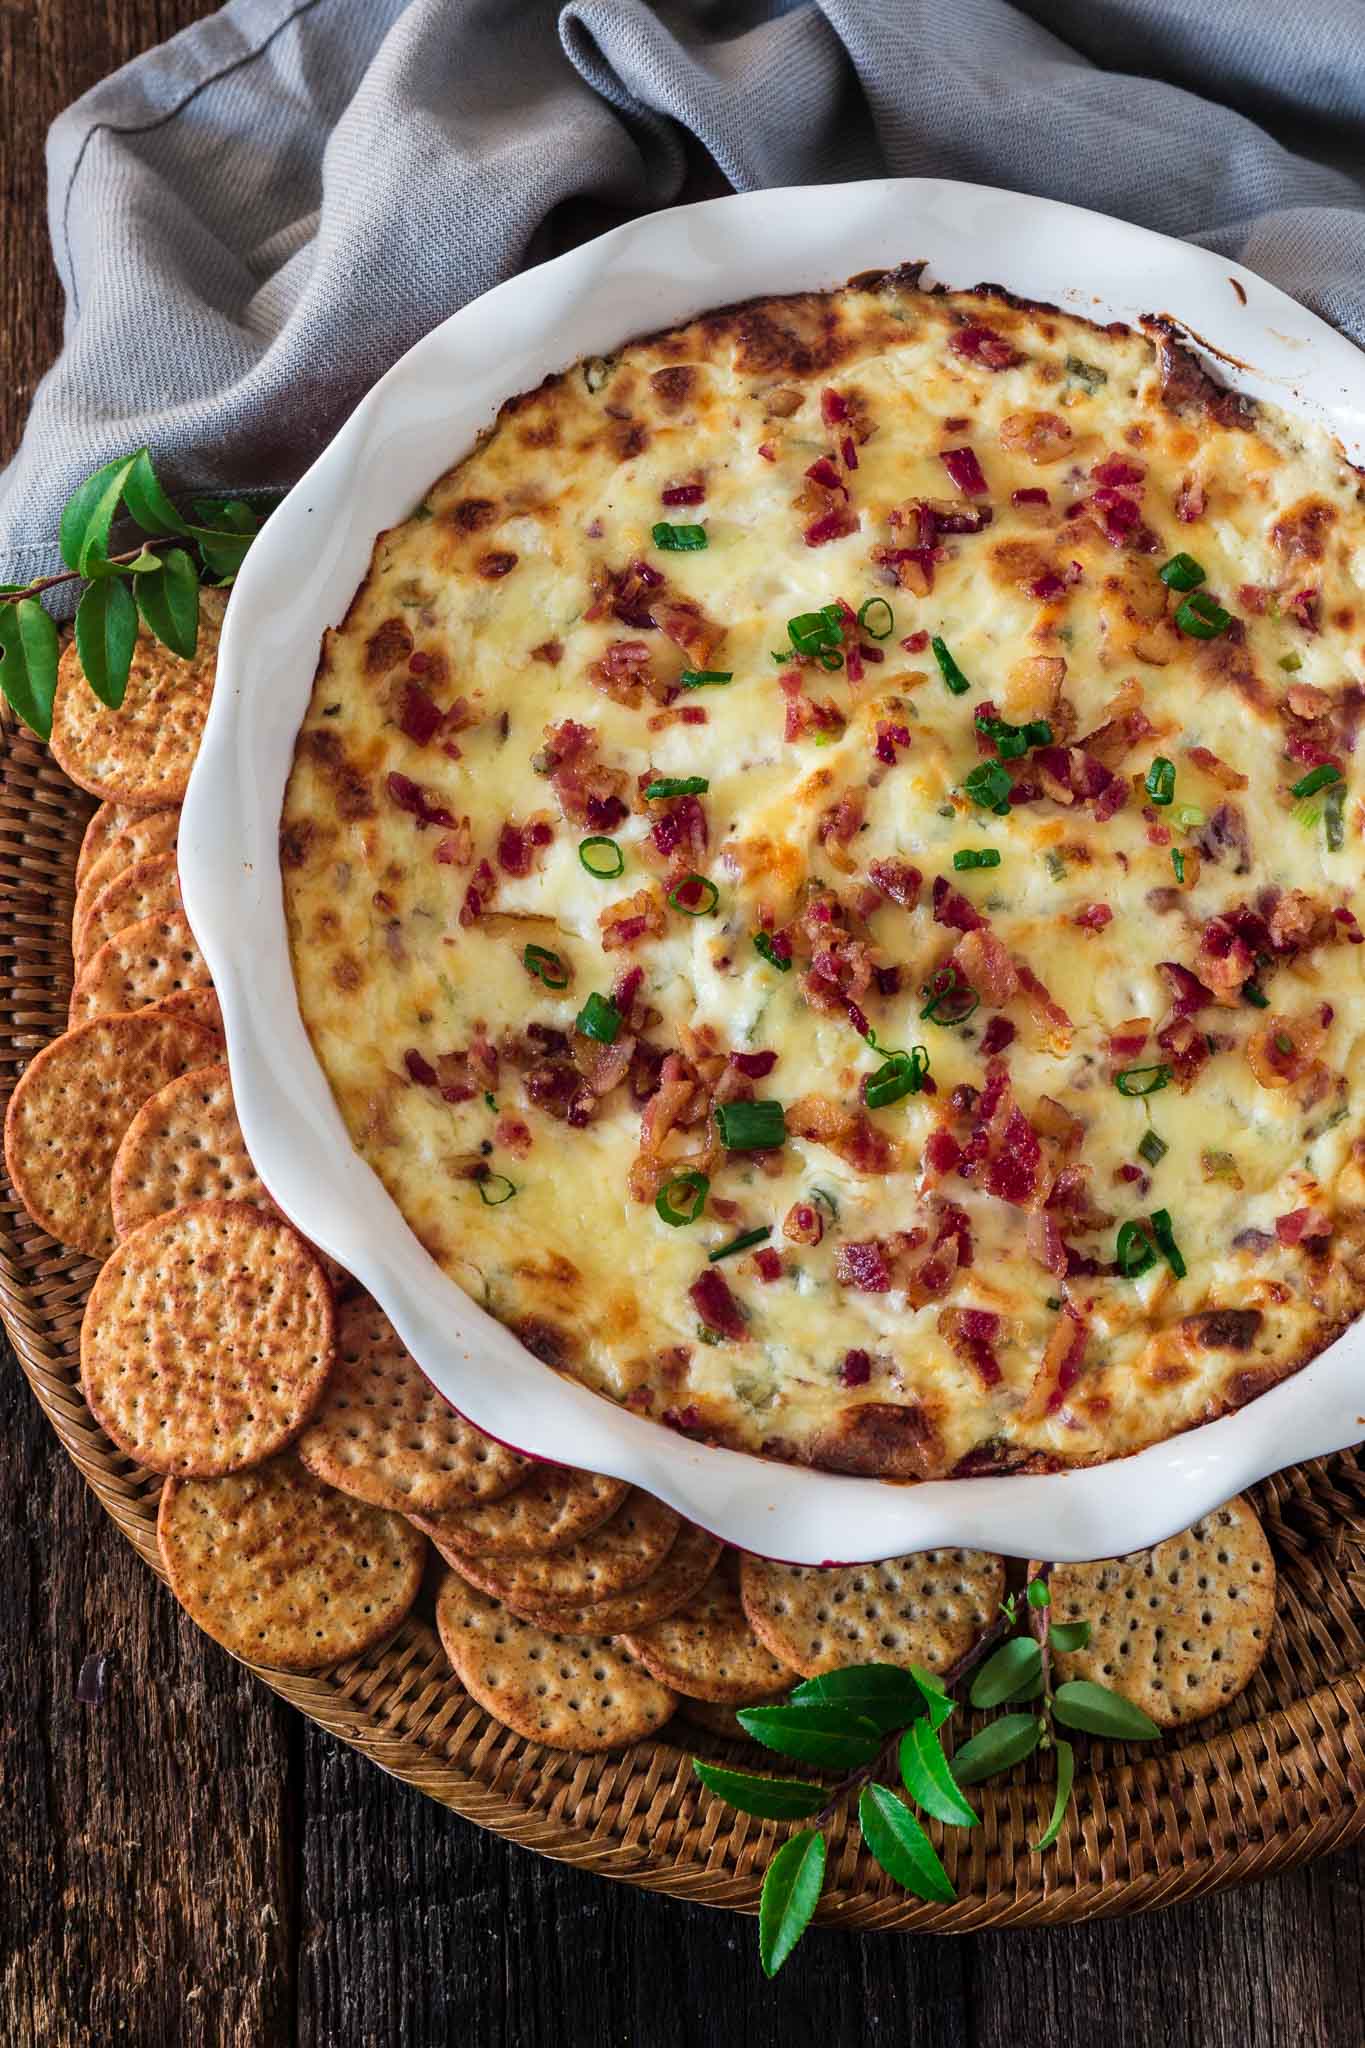 Hot Smoked Gouda Bacon Dip | www.oliviascuisine.com | Creamy, gooey and loaded with everyone's favorite ingredient, bacon, this Hot Smoked Gouda Bacon Dip is destined to be the star of your holiday party! Pair it with some good wine and you're on the road to success.